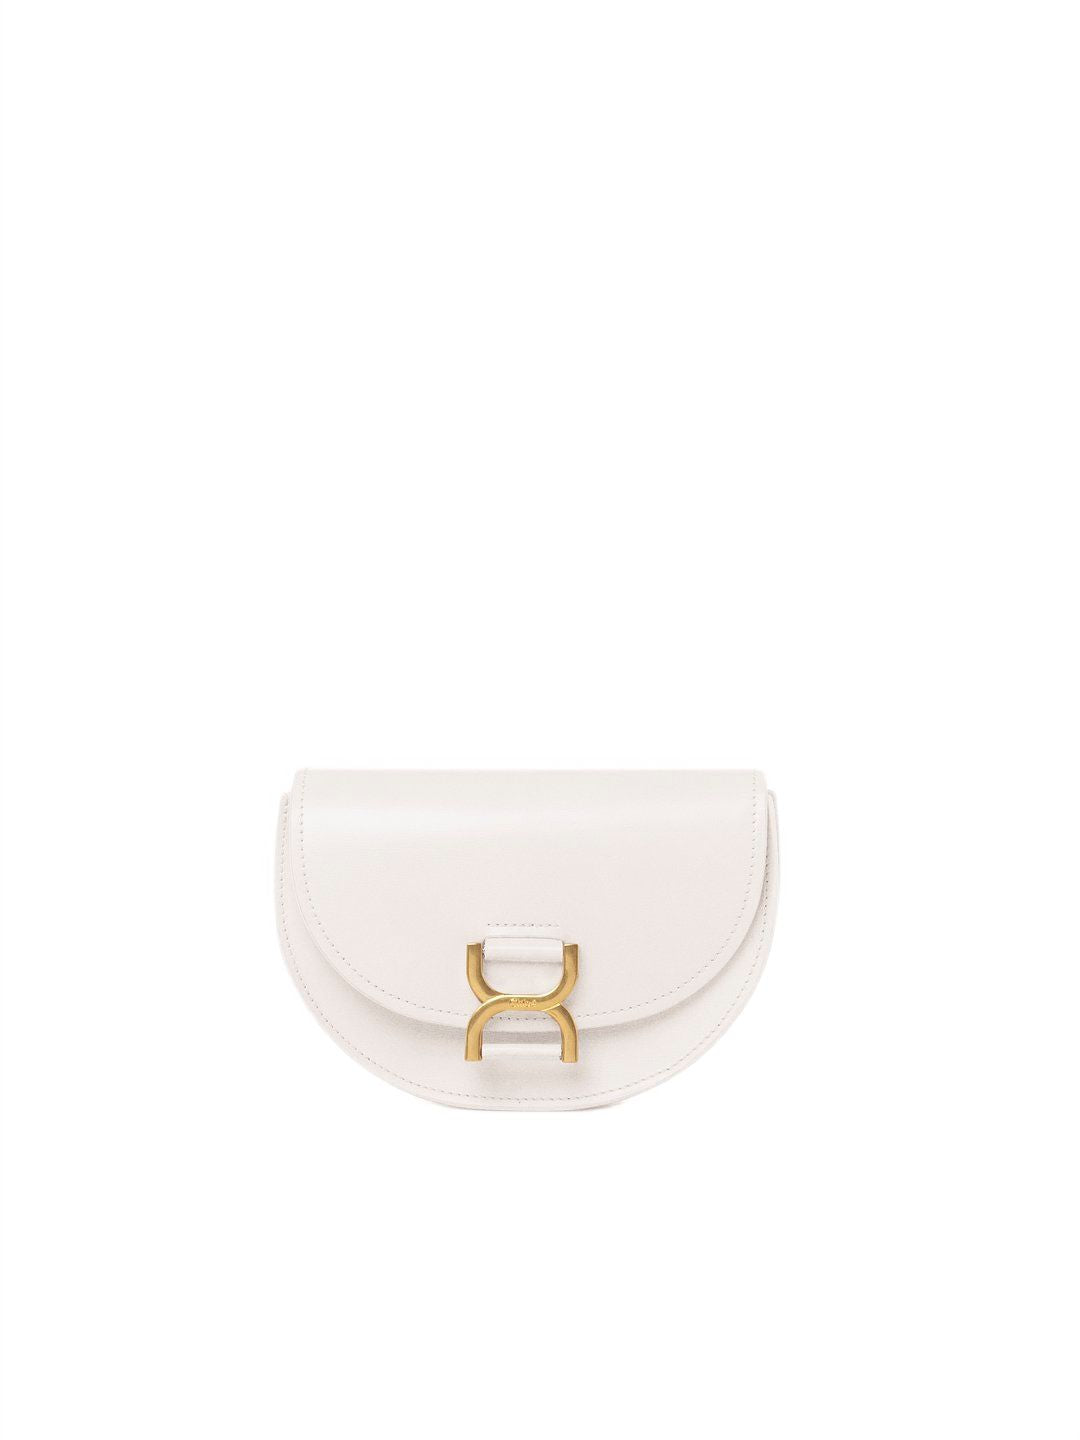 Misty Ivory Leather Shoulder Bag for Women - FW23 Collection